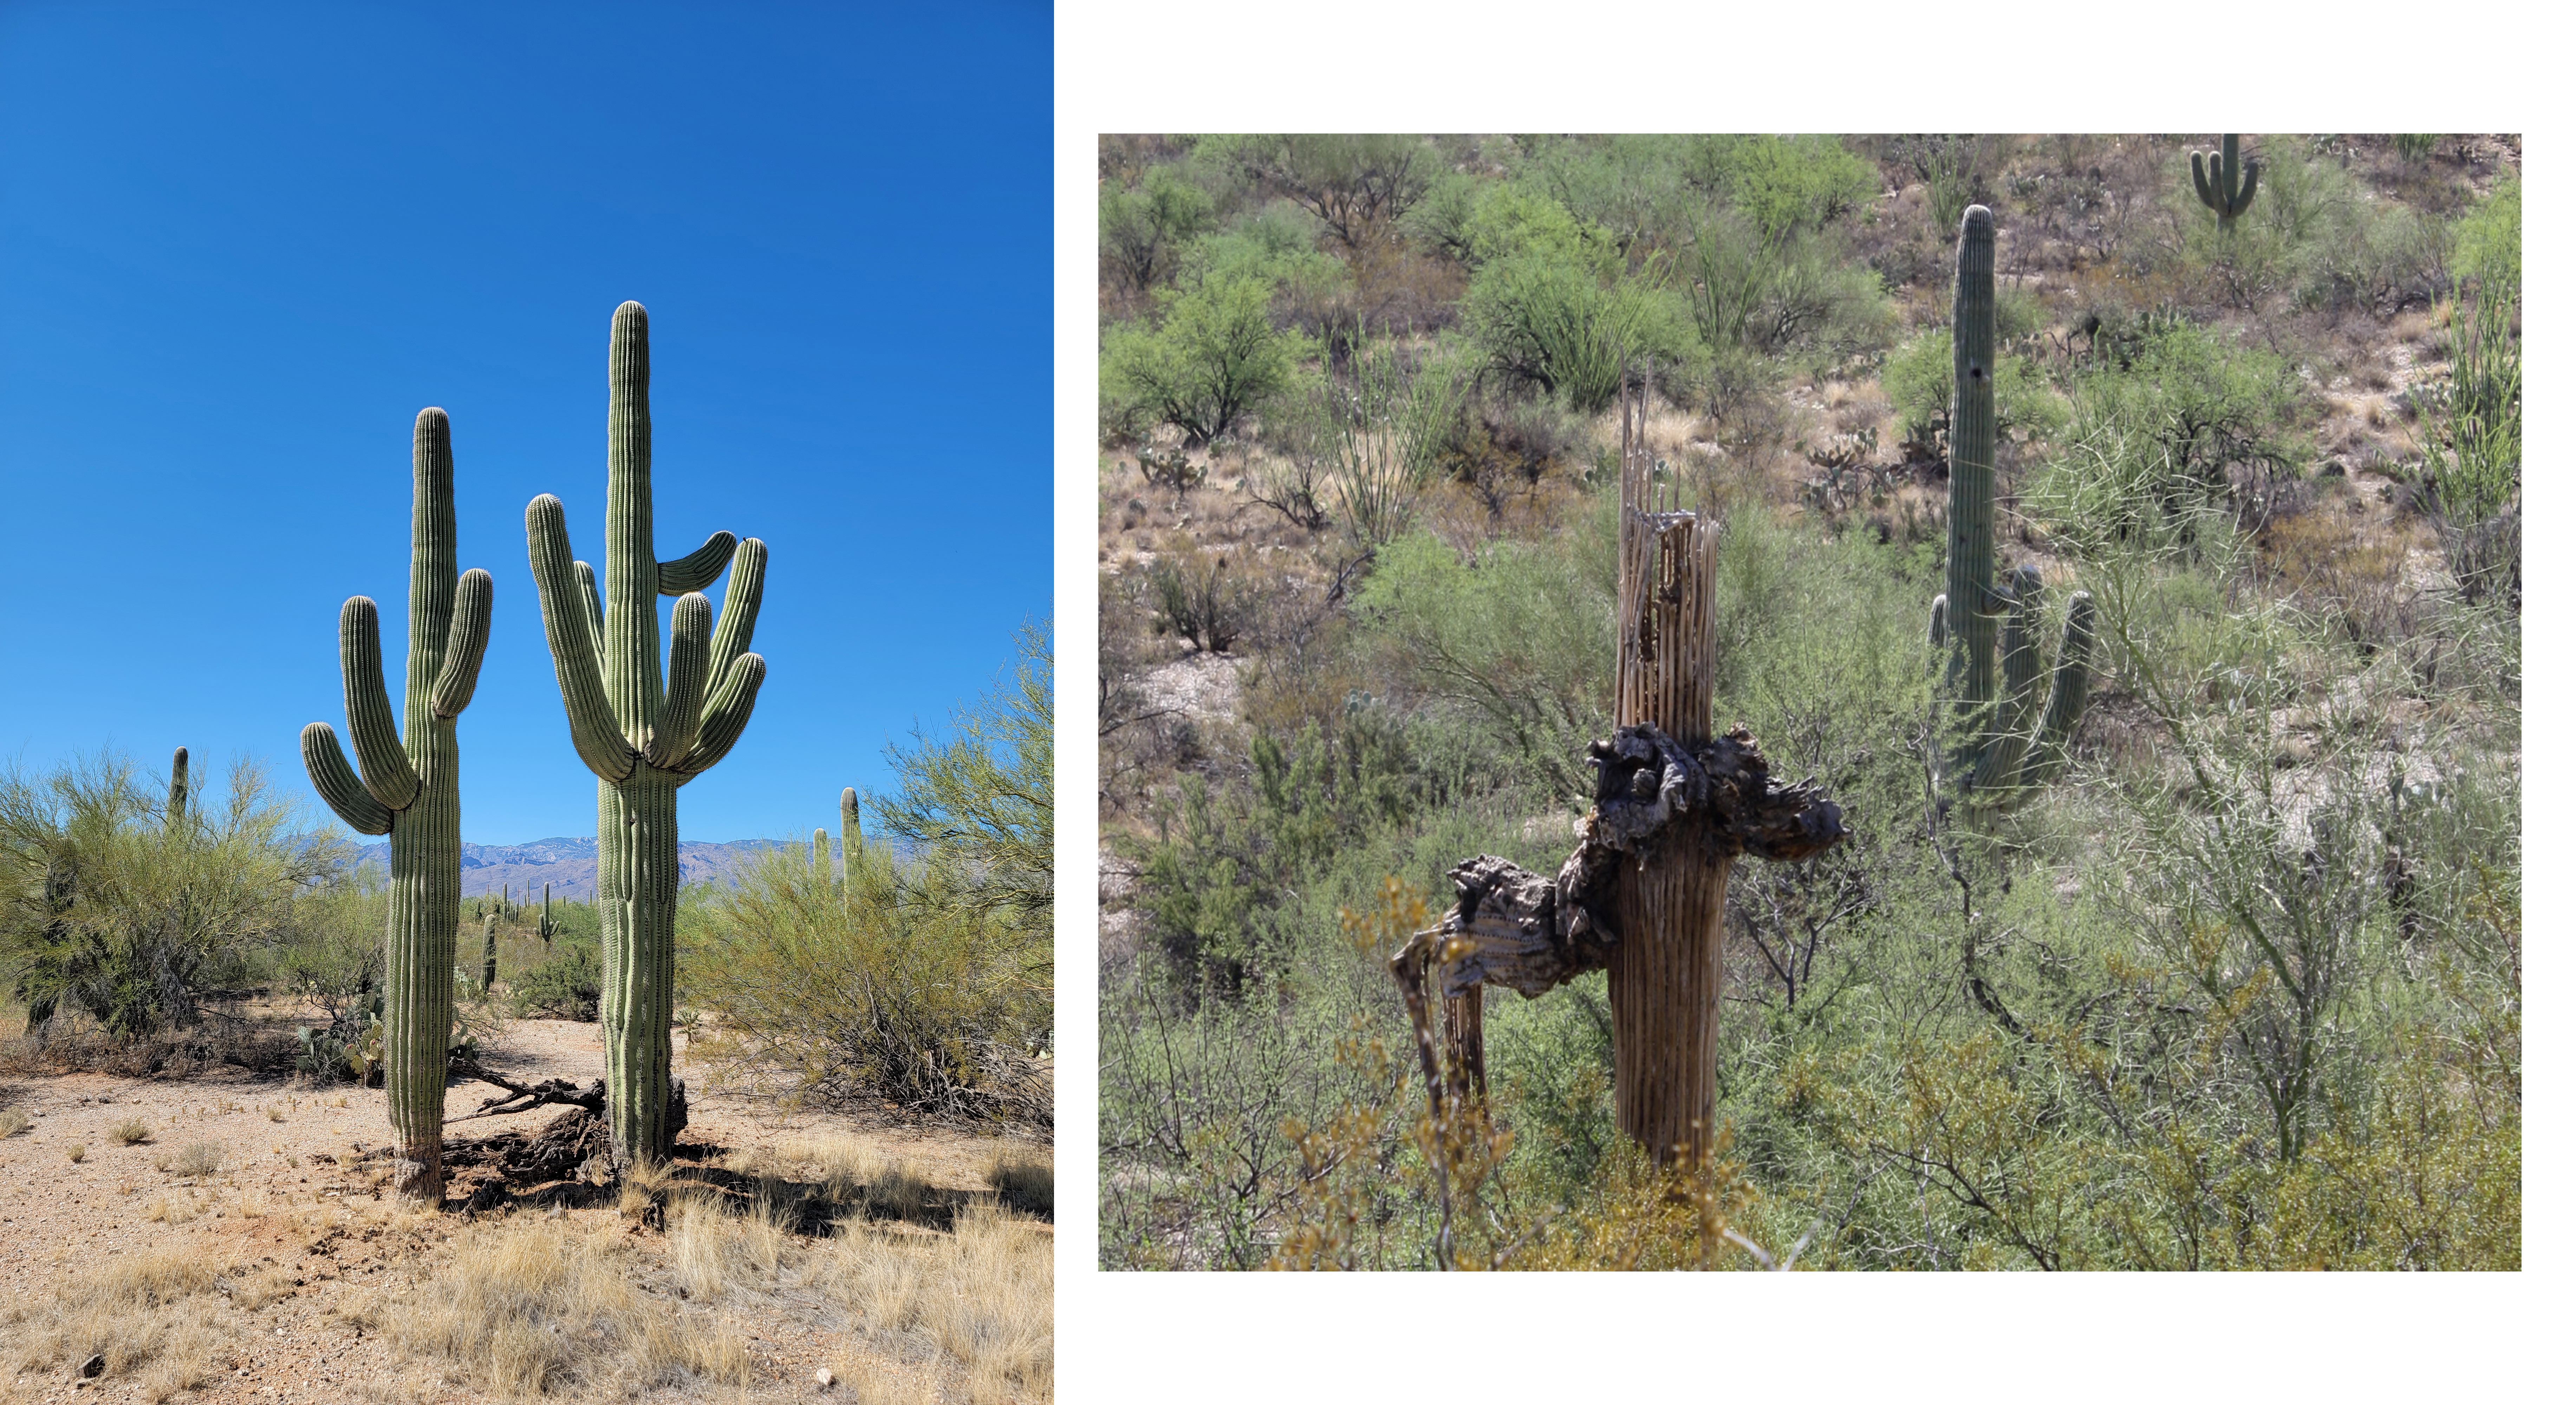 Two photos of saguaro cacti. The first is a full-plant shot, showing large saguaro cacti standing firmly in the ground. The second shows a dead saguaro that has had the flesh fall off, revealing the woody structure underneath.